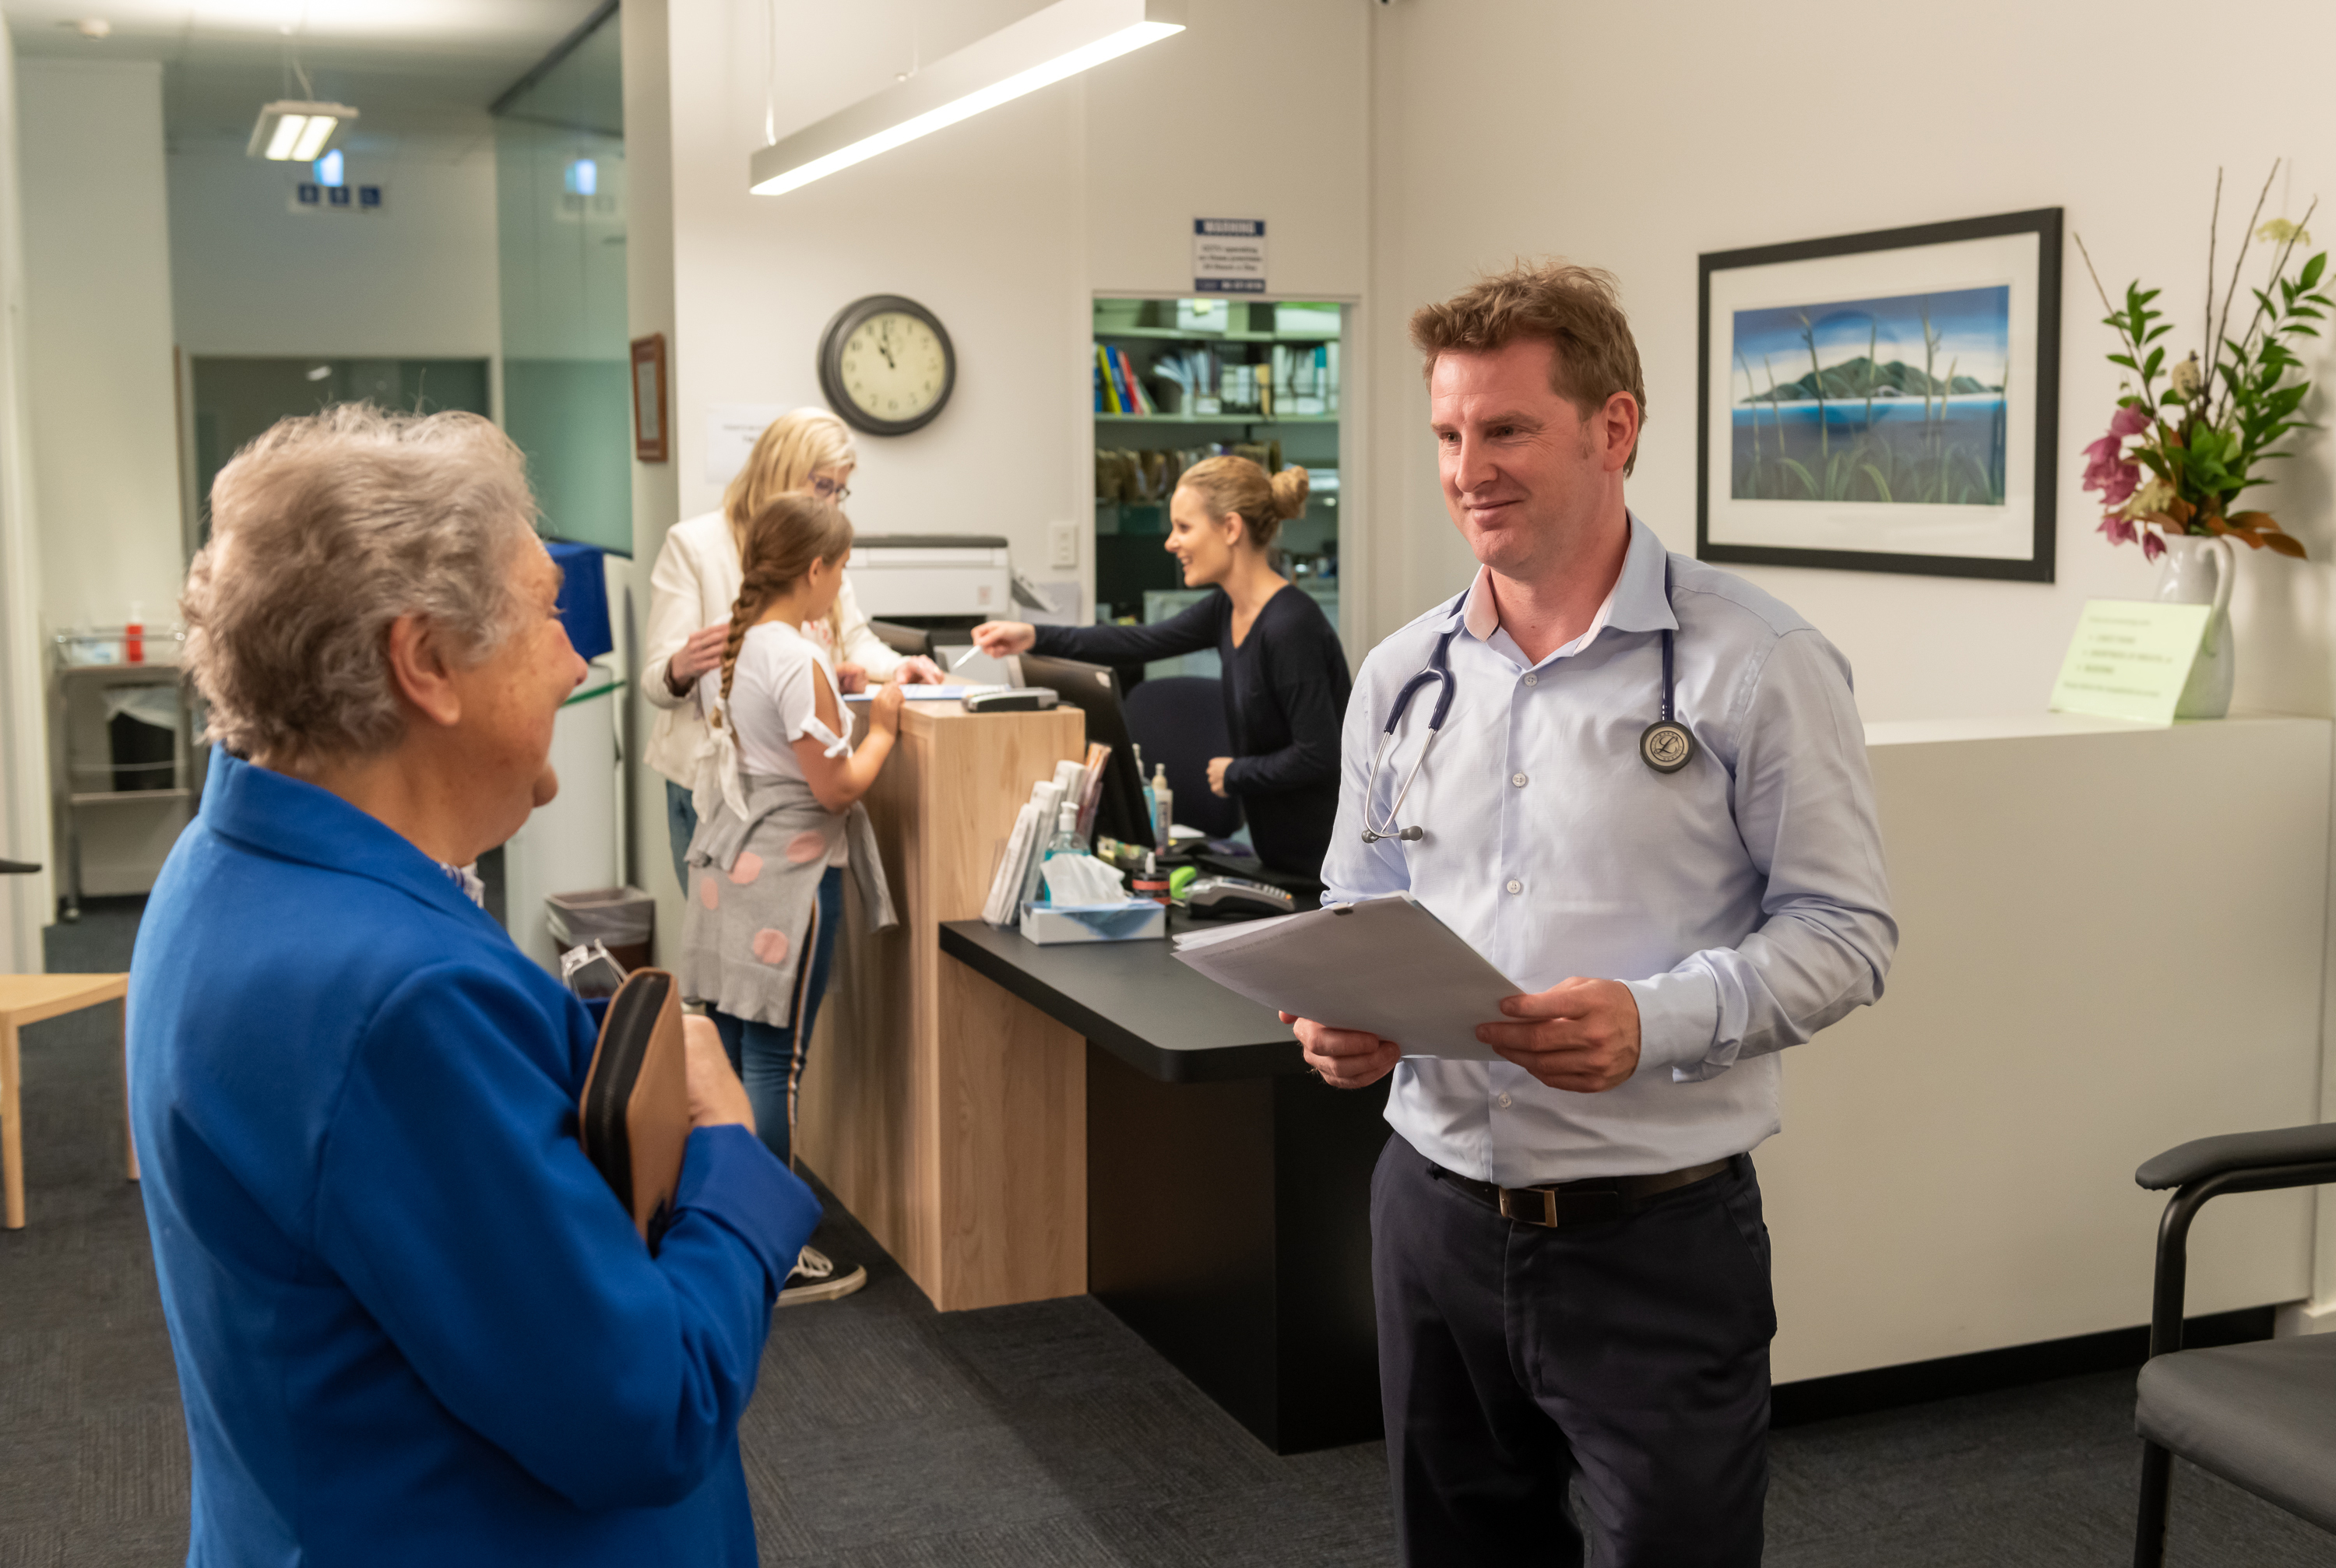 Provider talking to patient holding notes in hand